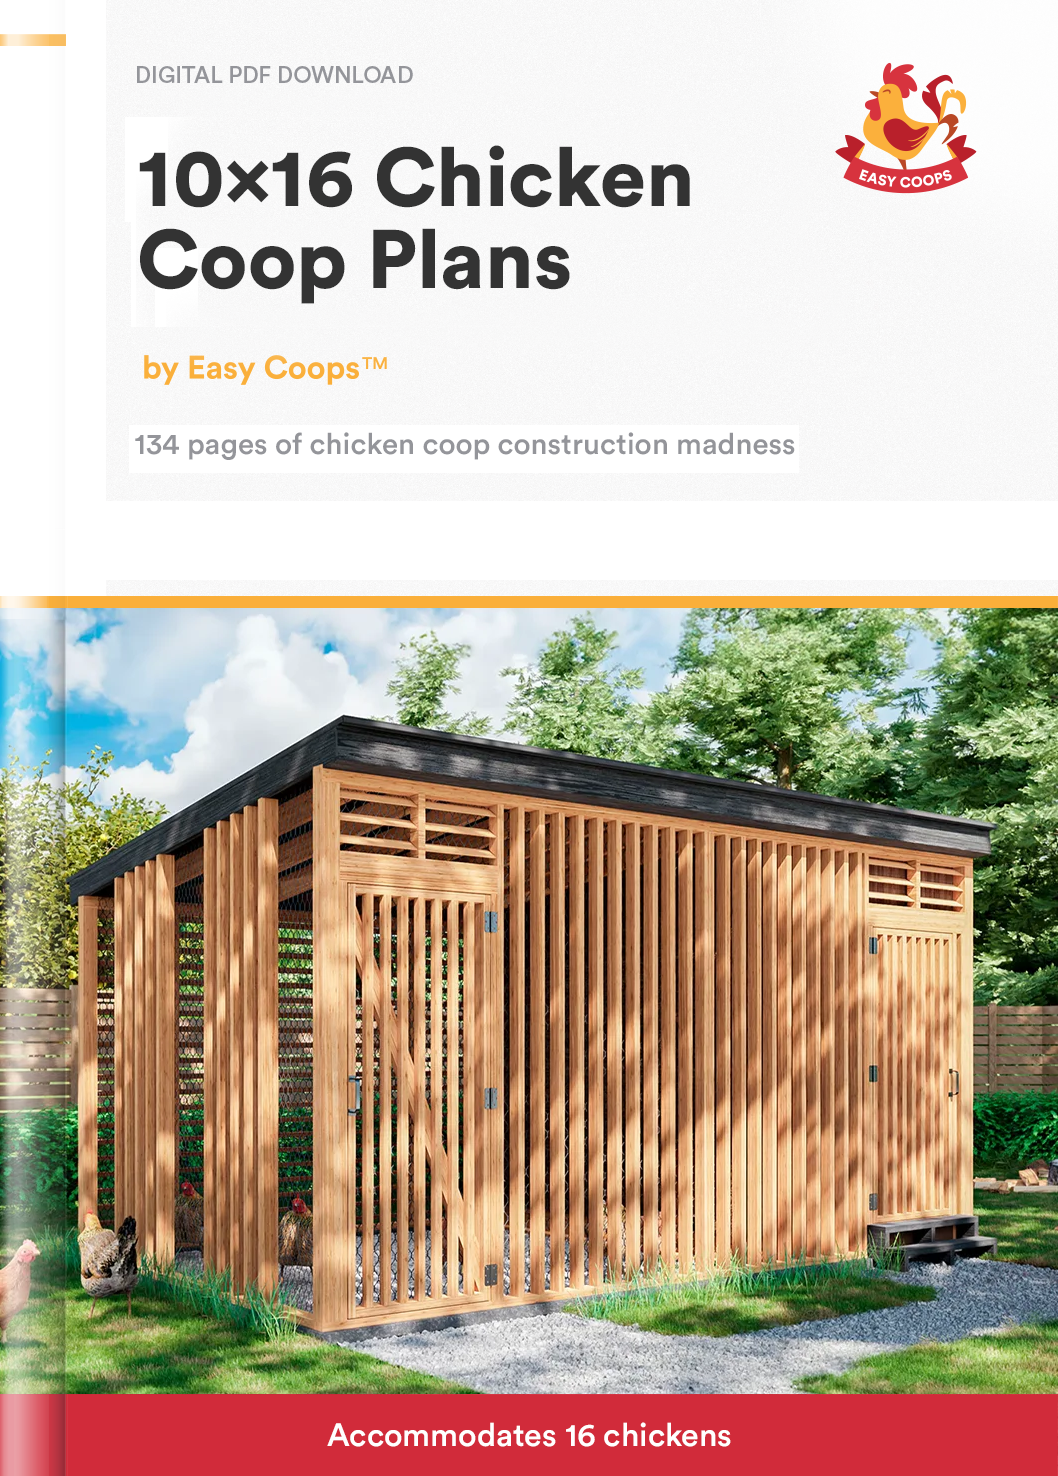 10x16 chicken coop plans product